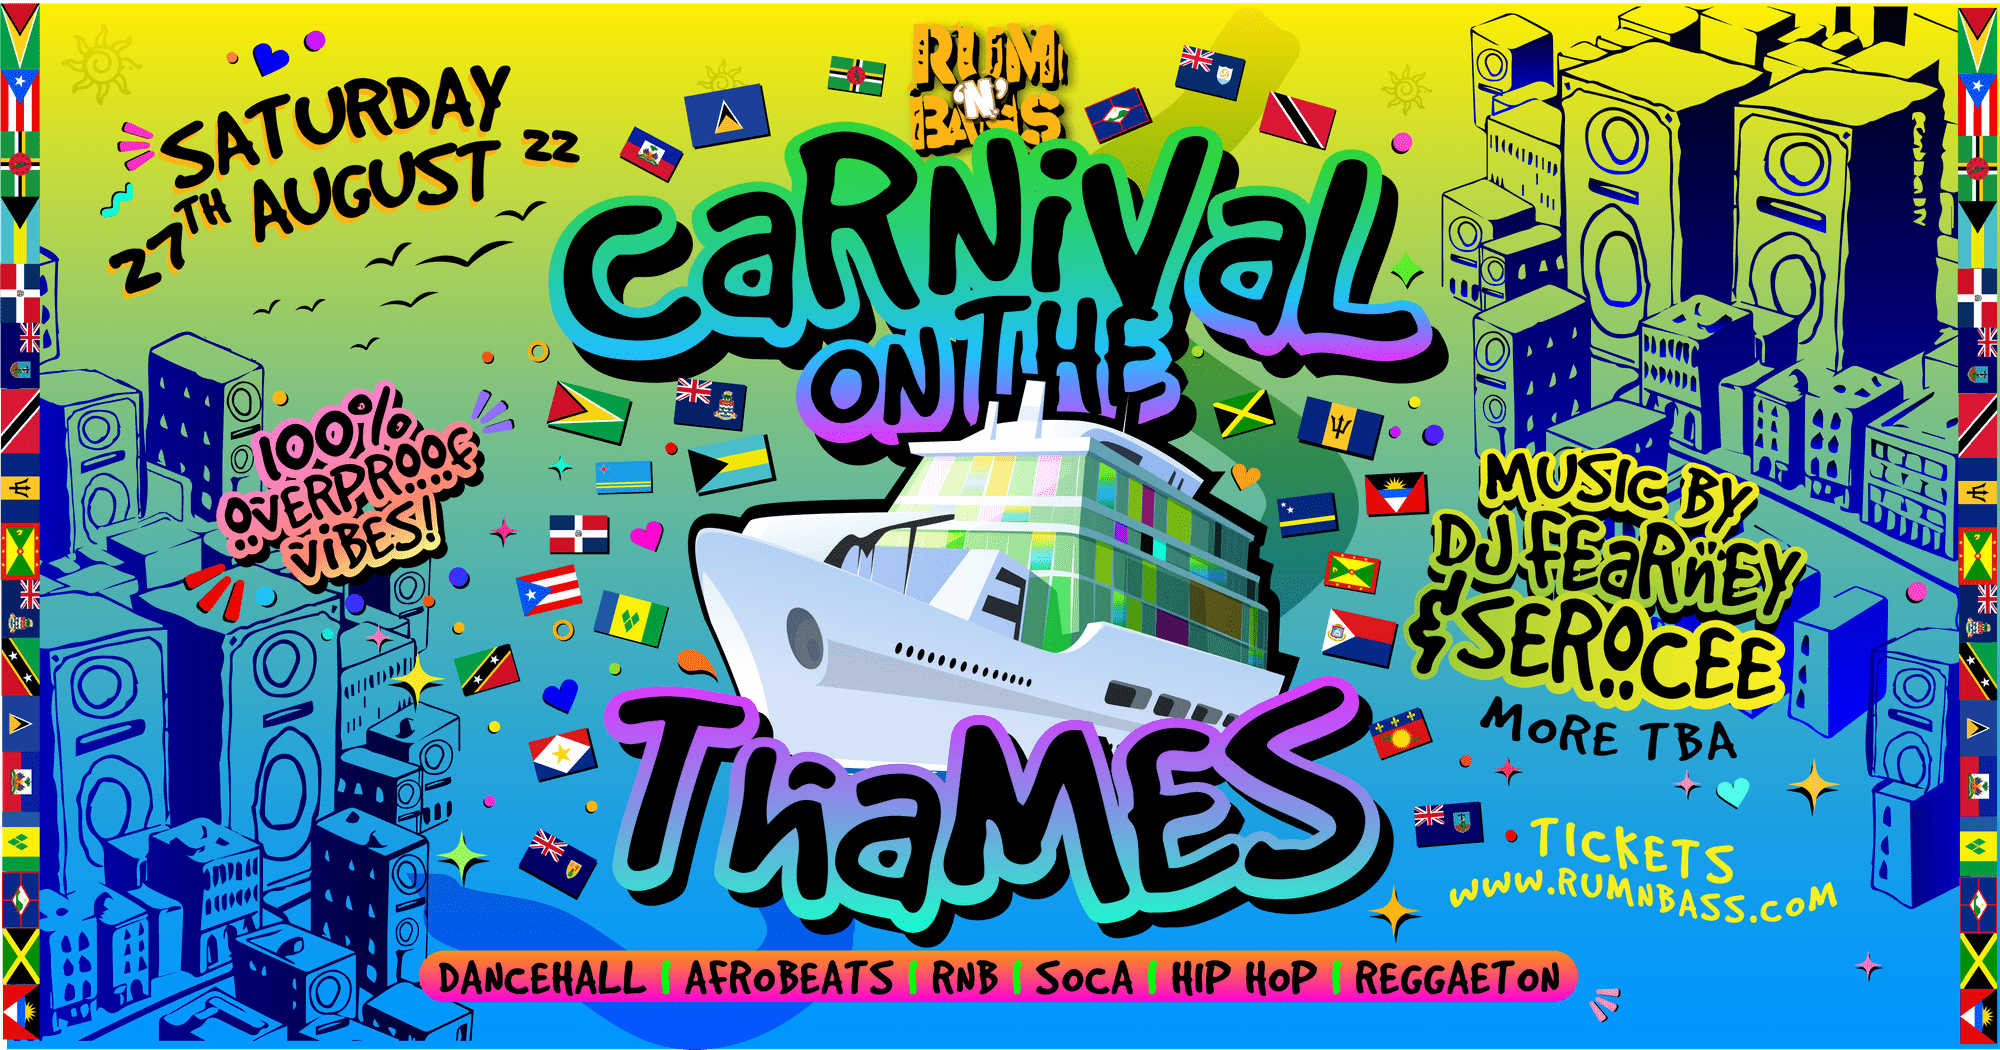 Flyer for Rum 'N' Bass annual pre-carnival boat party